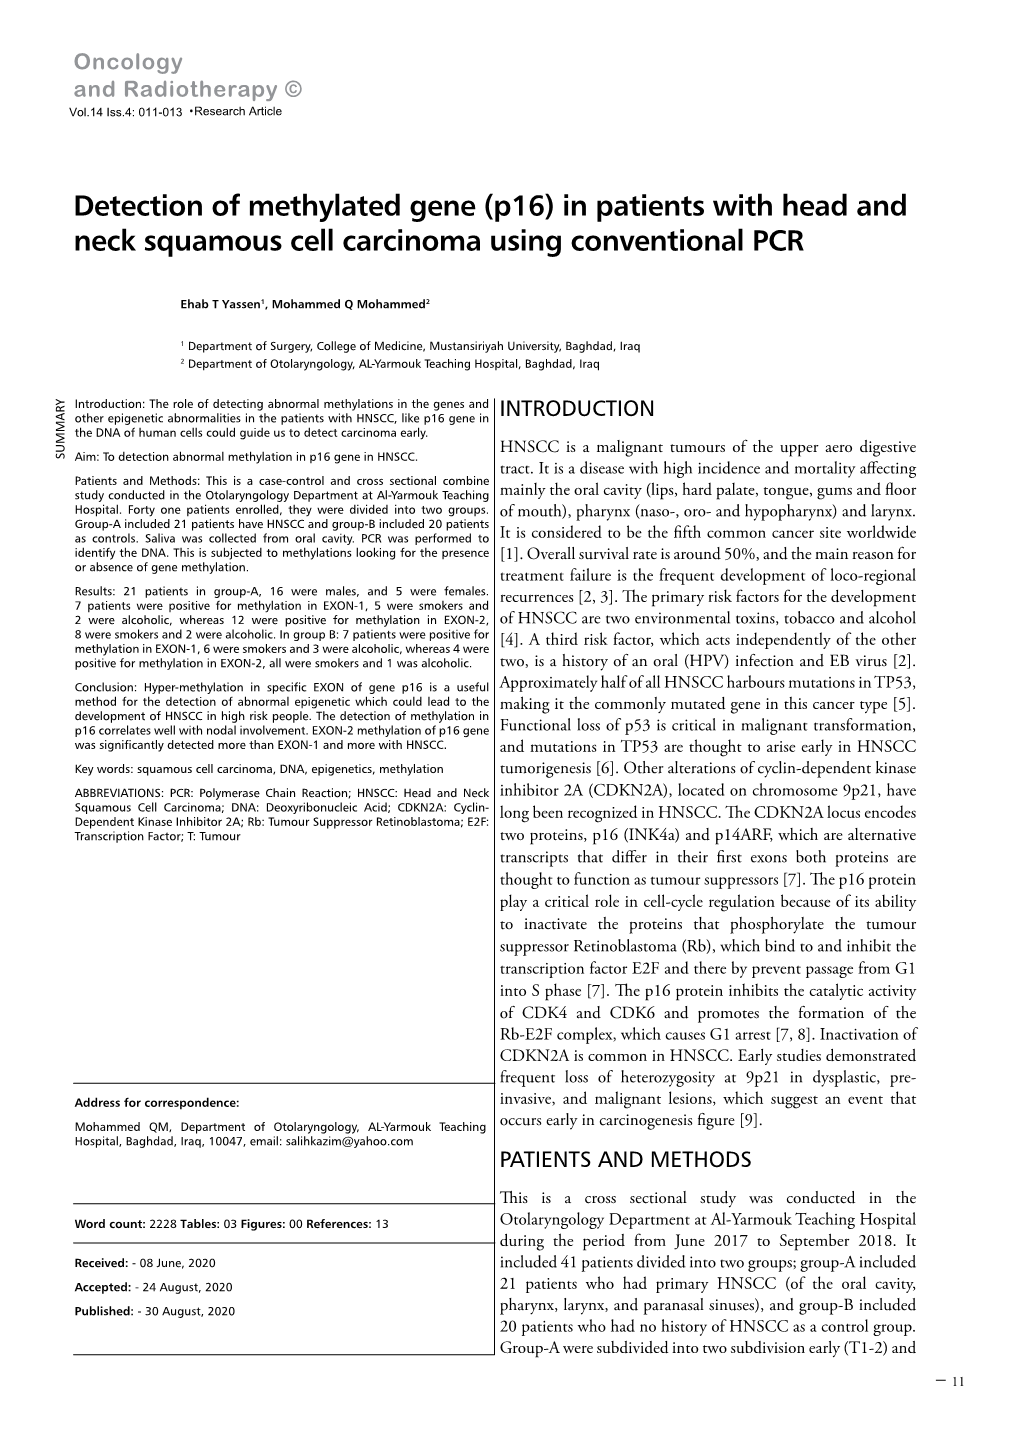 Detection of Methylated Gene (P16) in Patients with Head and Neck Squamous Cell Carcinoma Using Conventional PCR